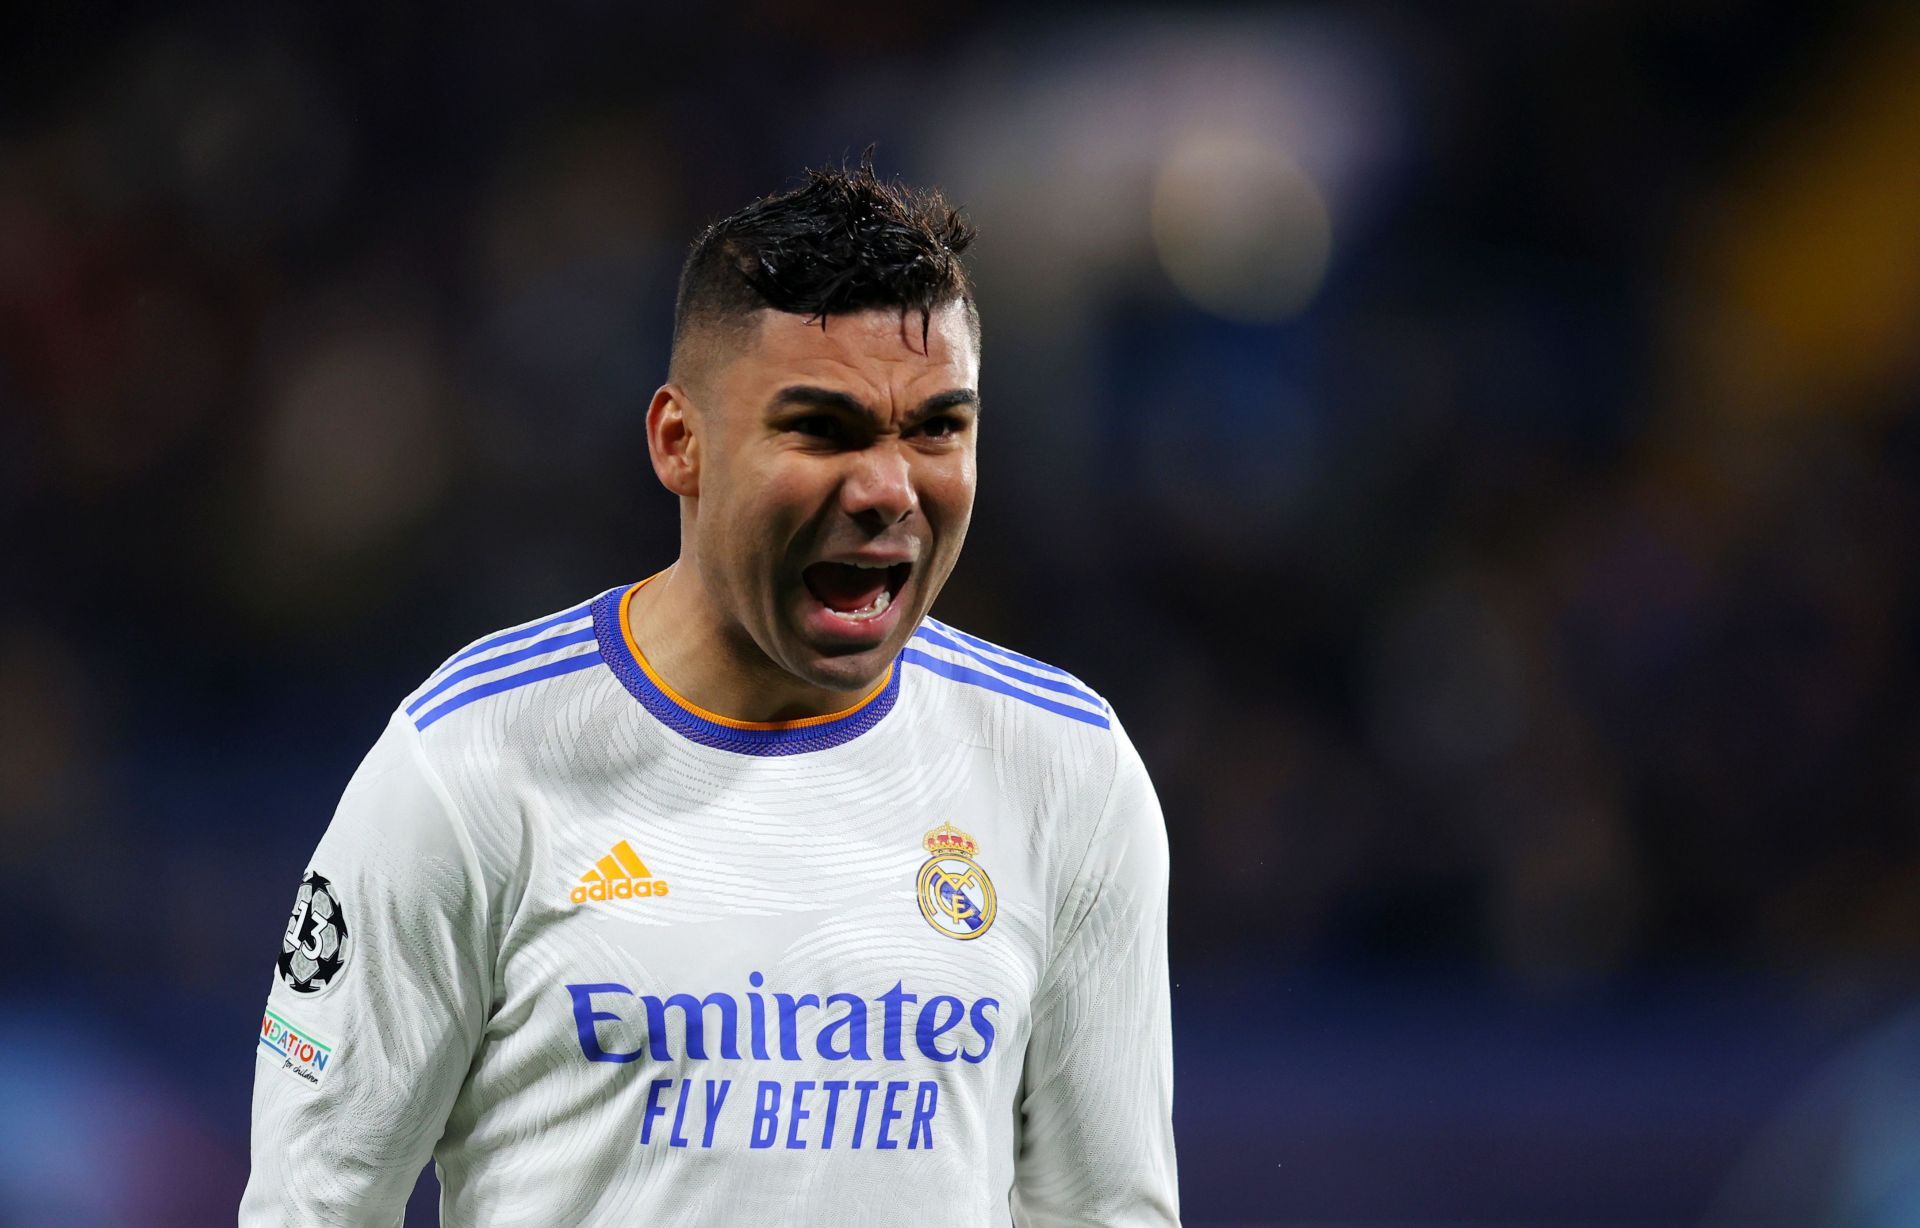 Casemiro was unimpressed by the reception to Gareth Bale.